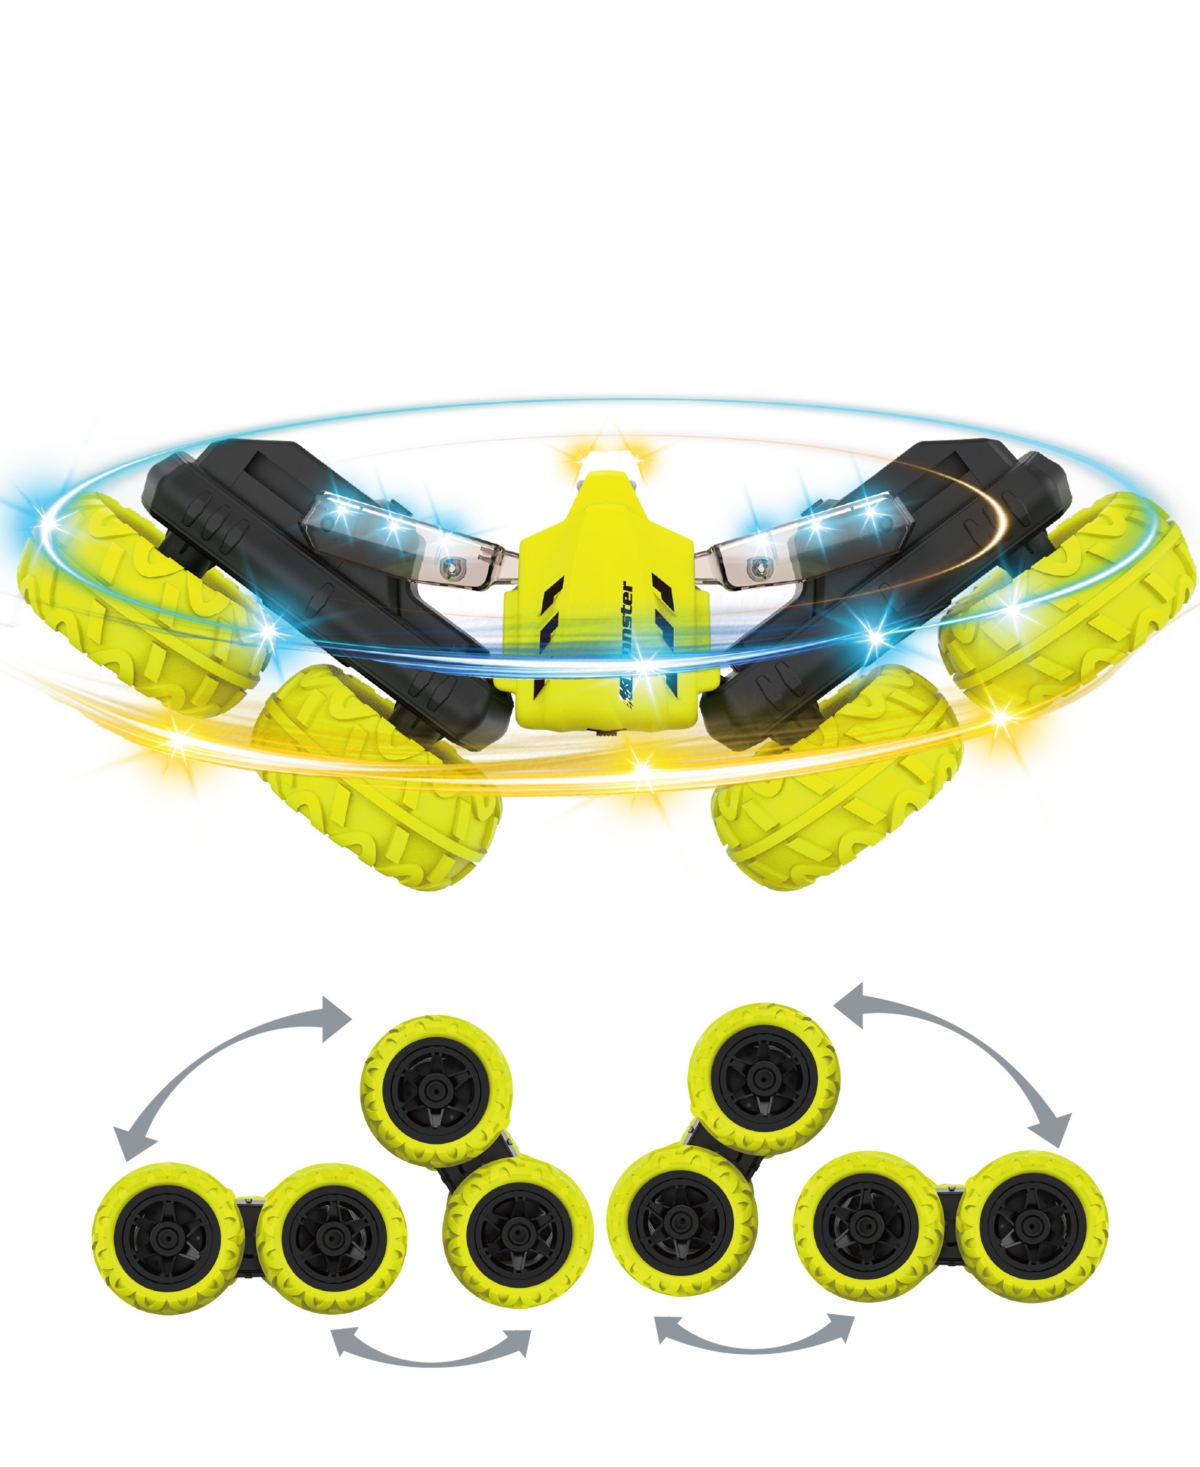 Shop Flipo Acrobat Rechargeable Remote Control Stunt Car In Yellow